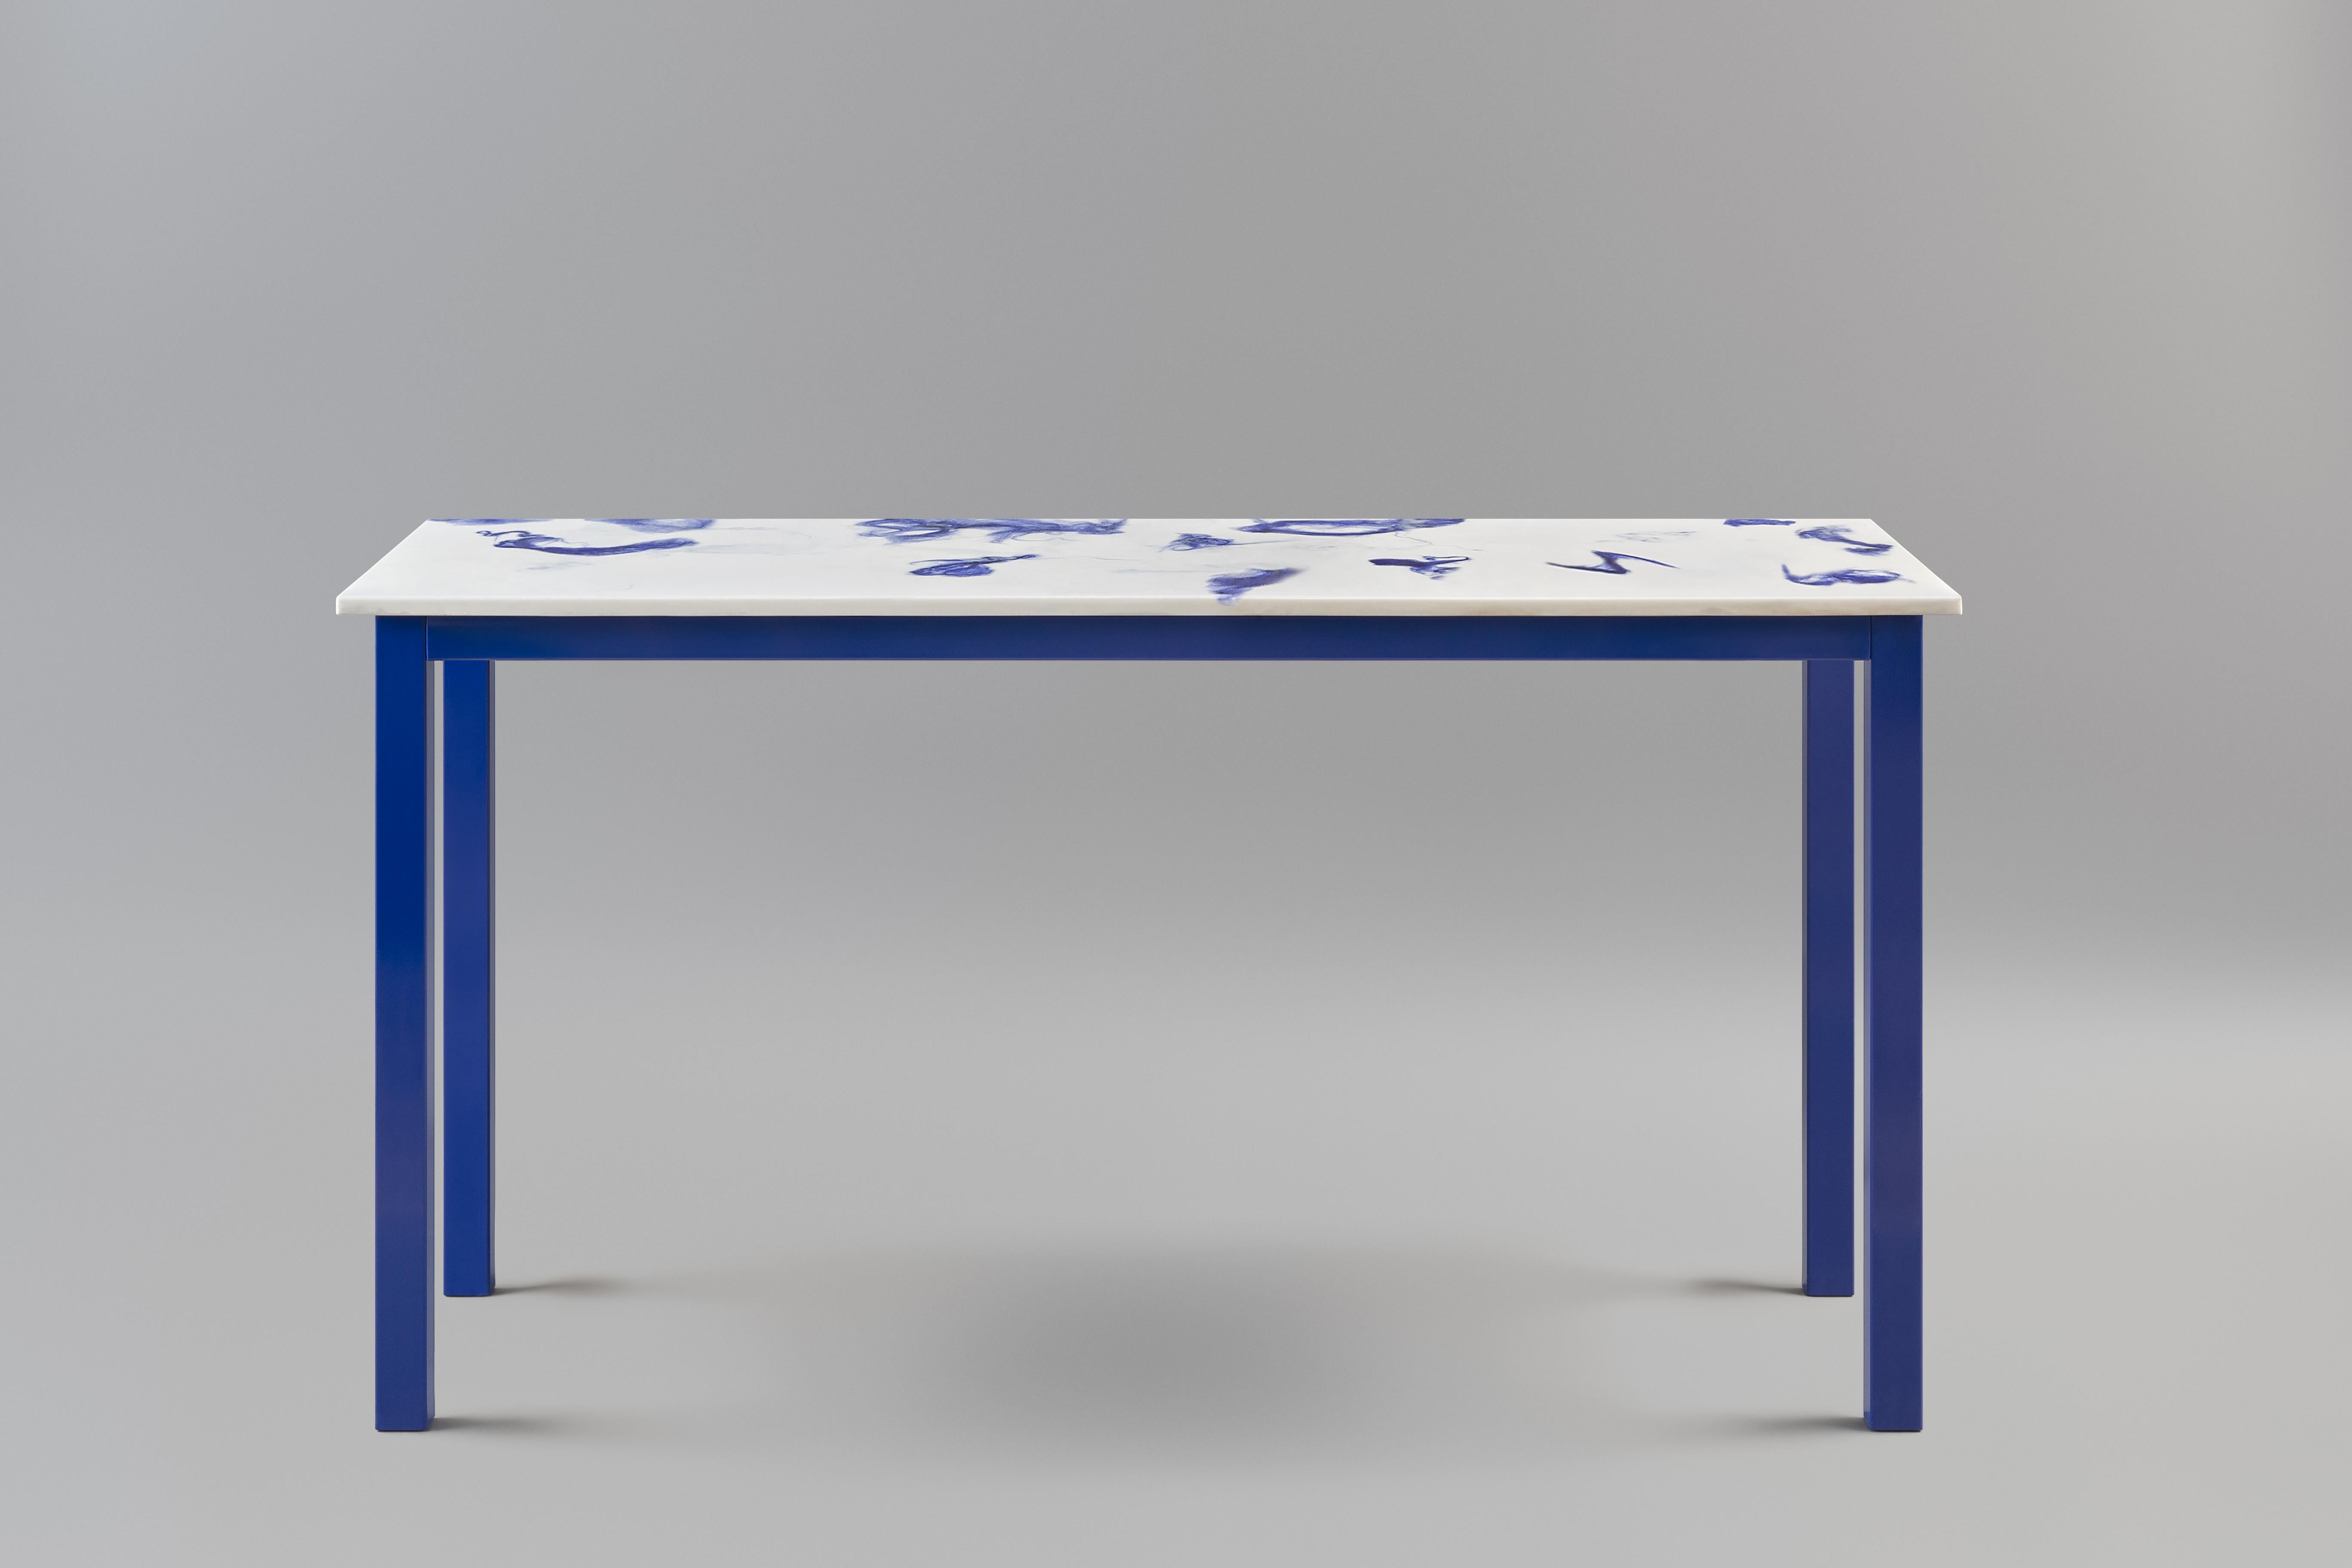 The Fluent console.
The table top is made in Marwoolus material with blue wool fibers and white Carrara marble powder base.
The steel frame structure is blue powder coated.

Material info:
Marwoolus is a new material invented by Marco Guazzini